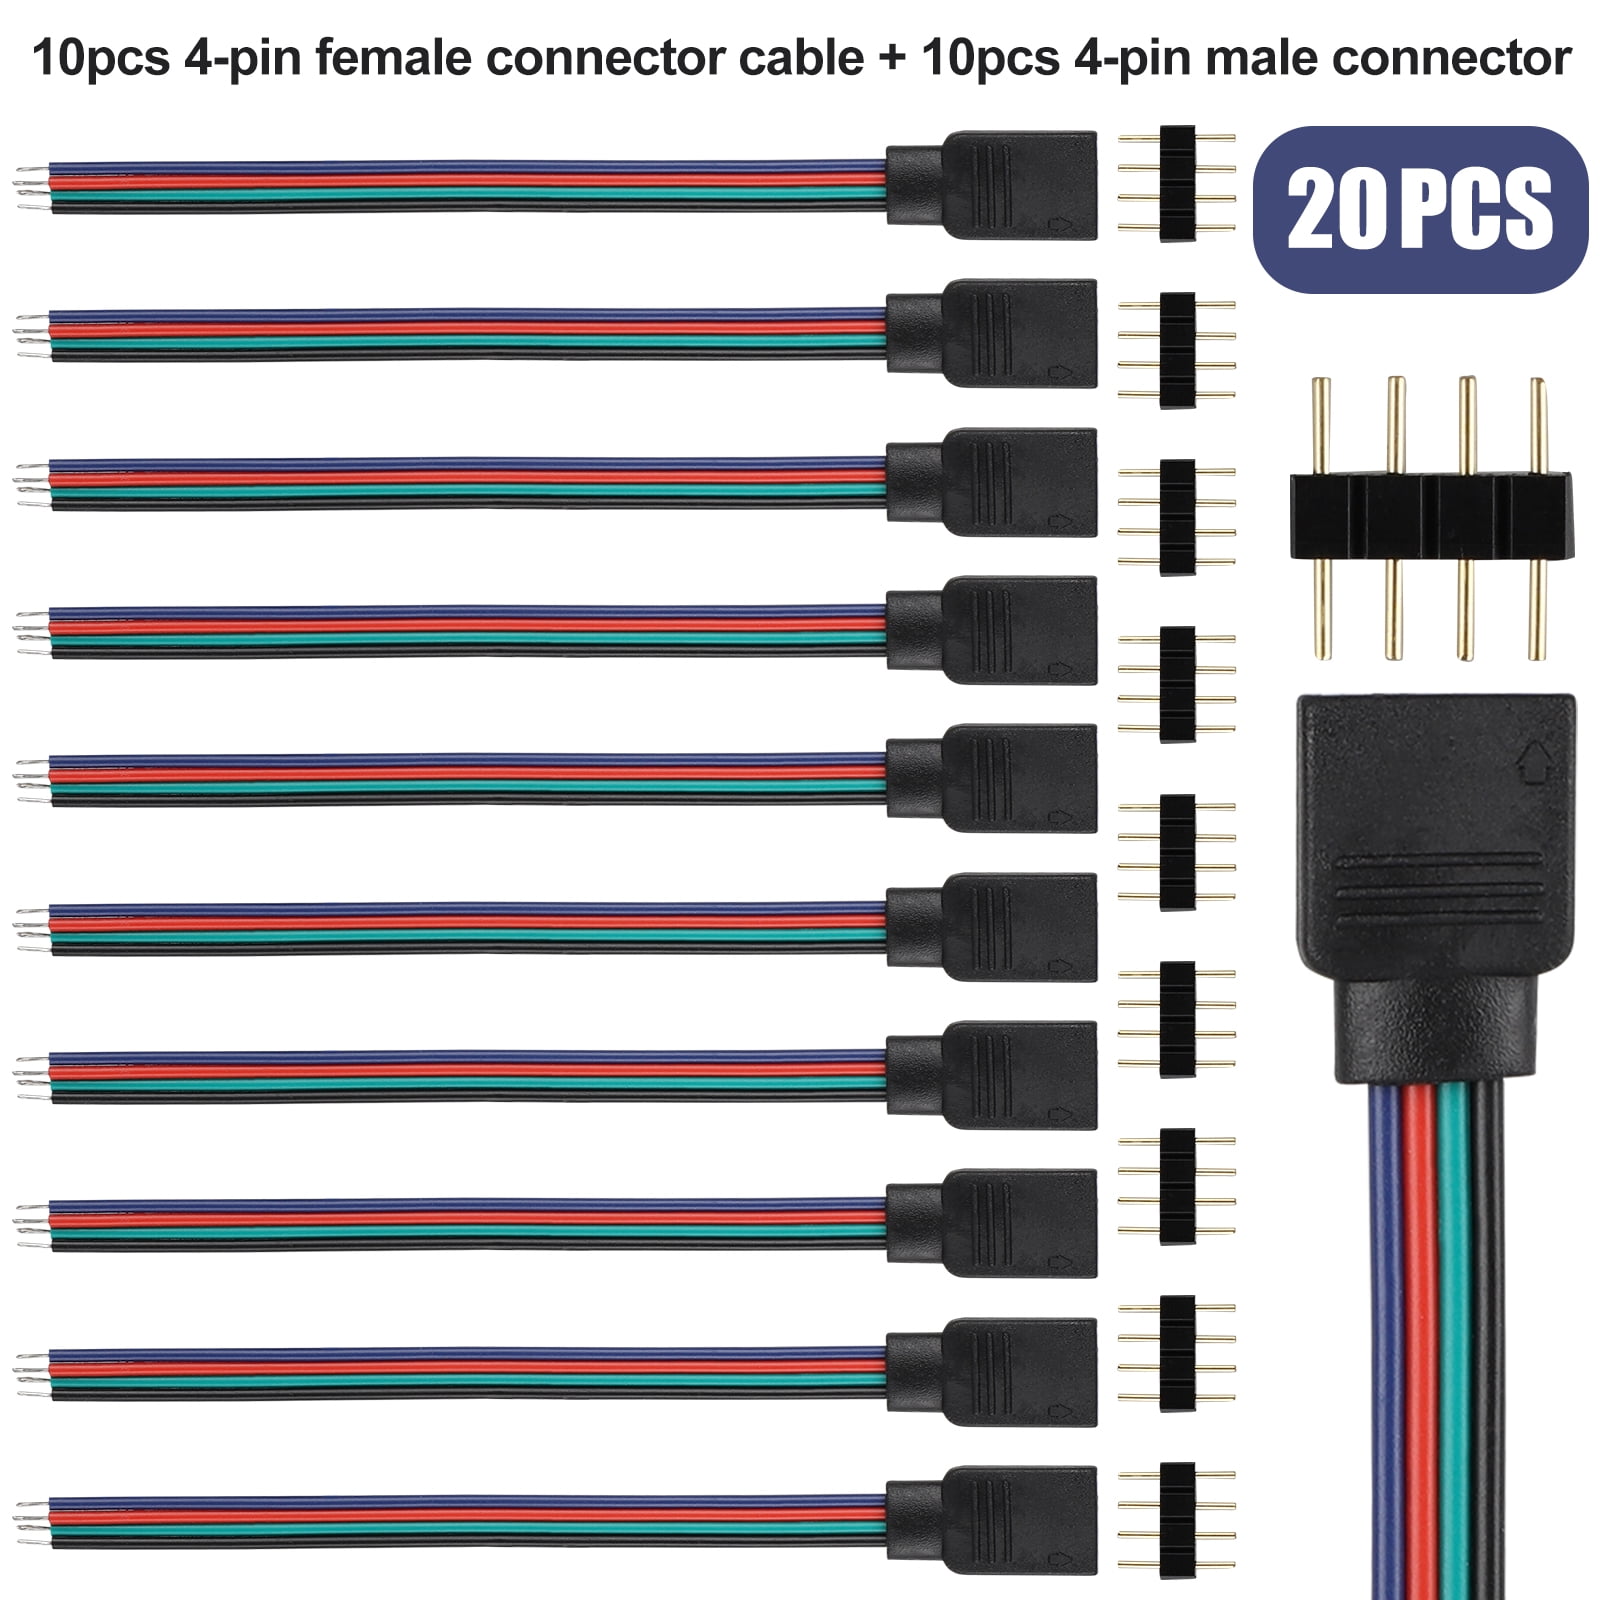 10 Pcs/Set 4 Pin Female Male Connector Cables For RGB 3528/5050 LED Strip Light 